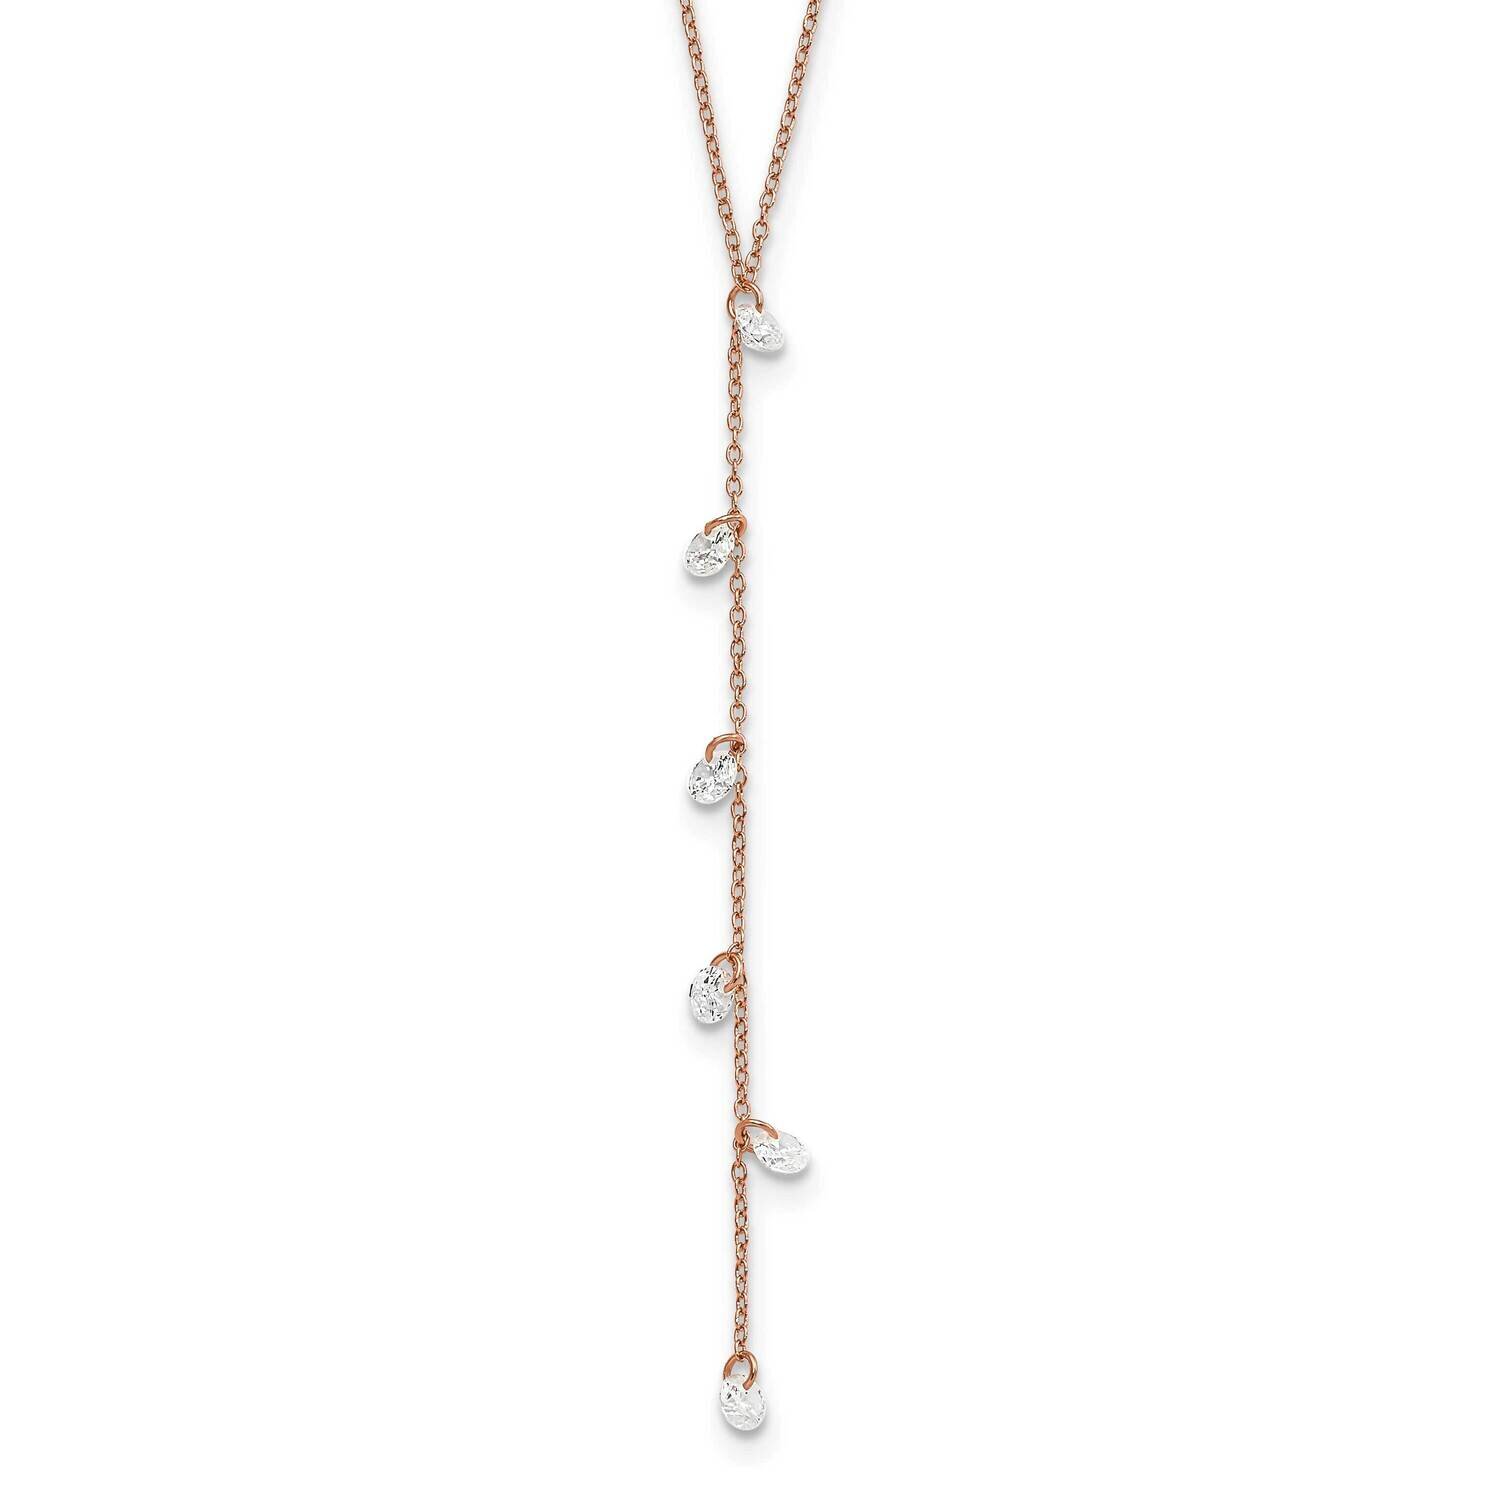 CZ Diamond Dangle with 2 Inch Extender Necklace 16 Inch Sterling Silver Rose-Tone QG5307-16